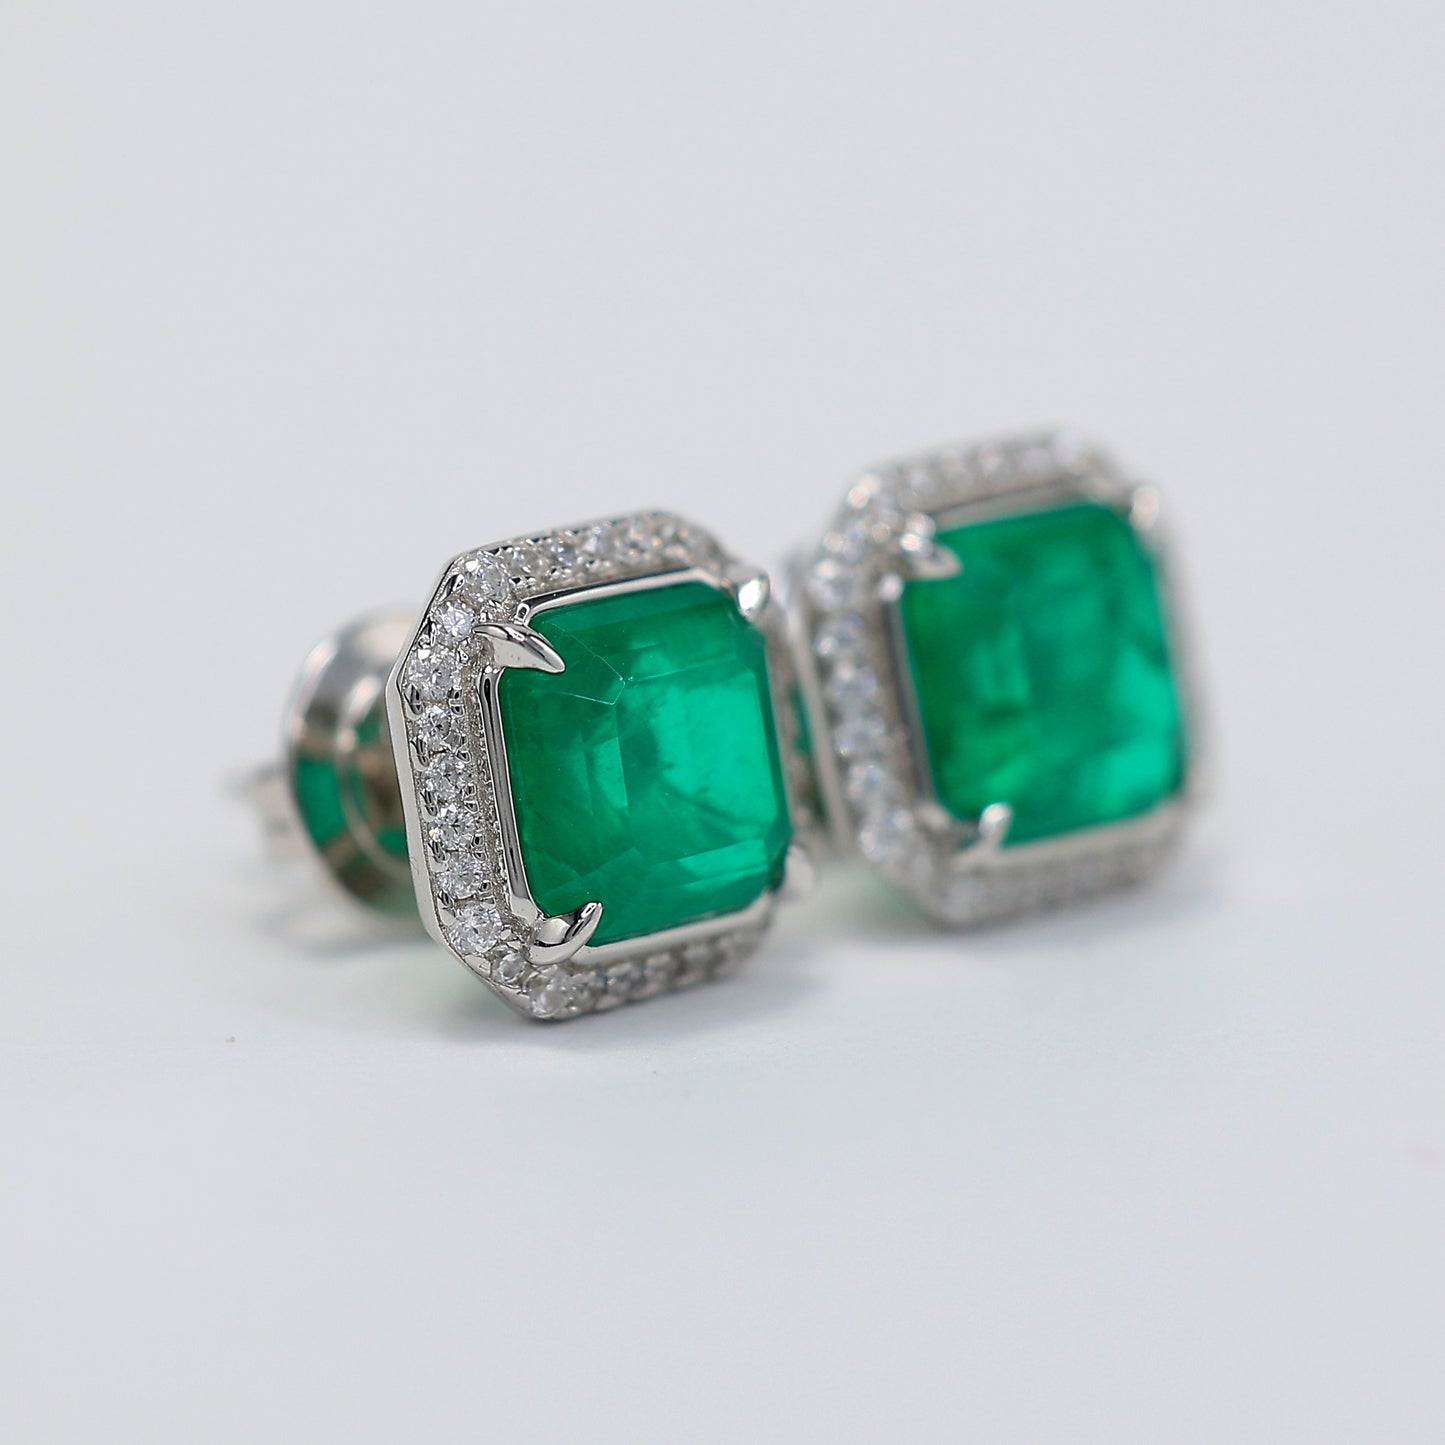 Micro-setting Emerald color Lab created stones 4 prong earrings, sterling silver